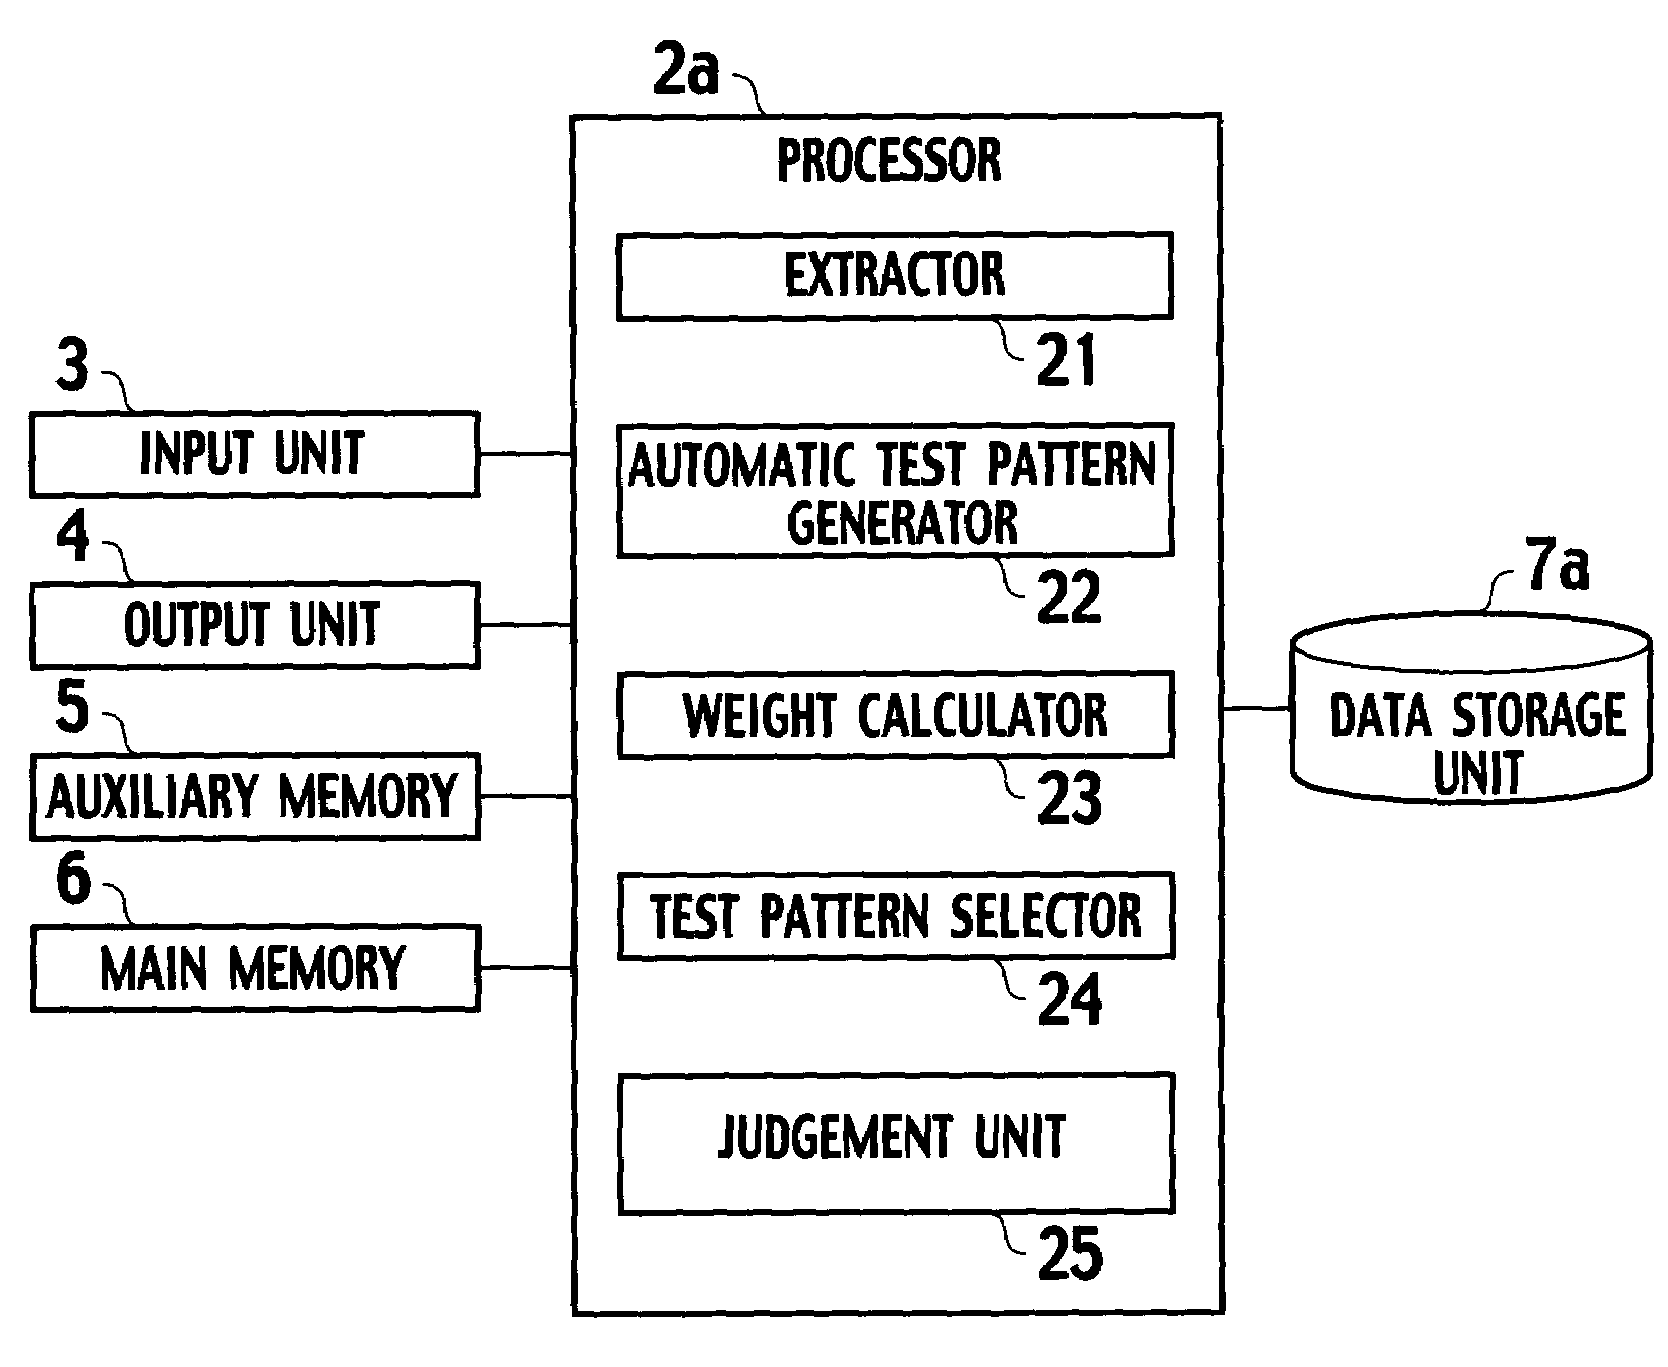 Test pattern generating apparatus, method for automatically generating test patterns and computer program product for executing an application for a test pattern generating apparatus